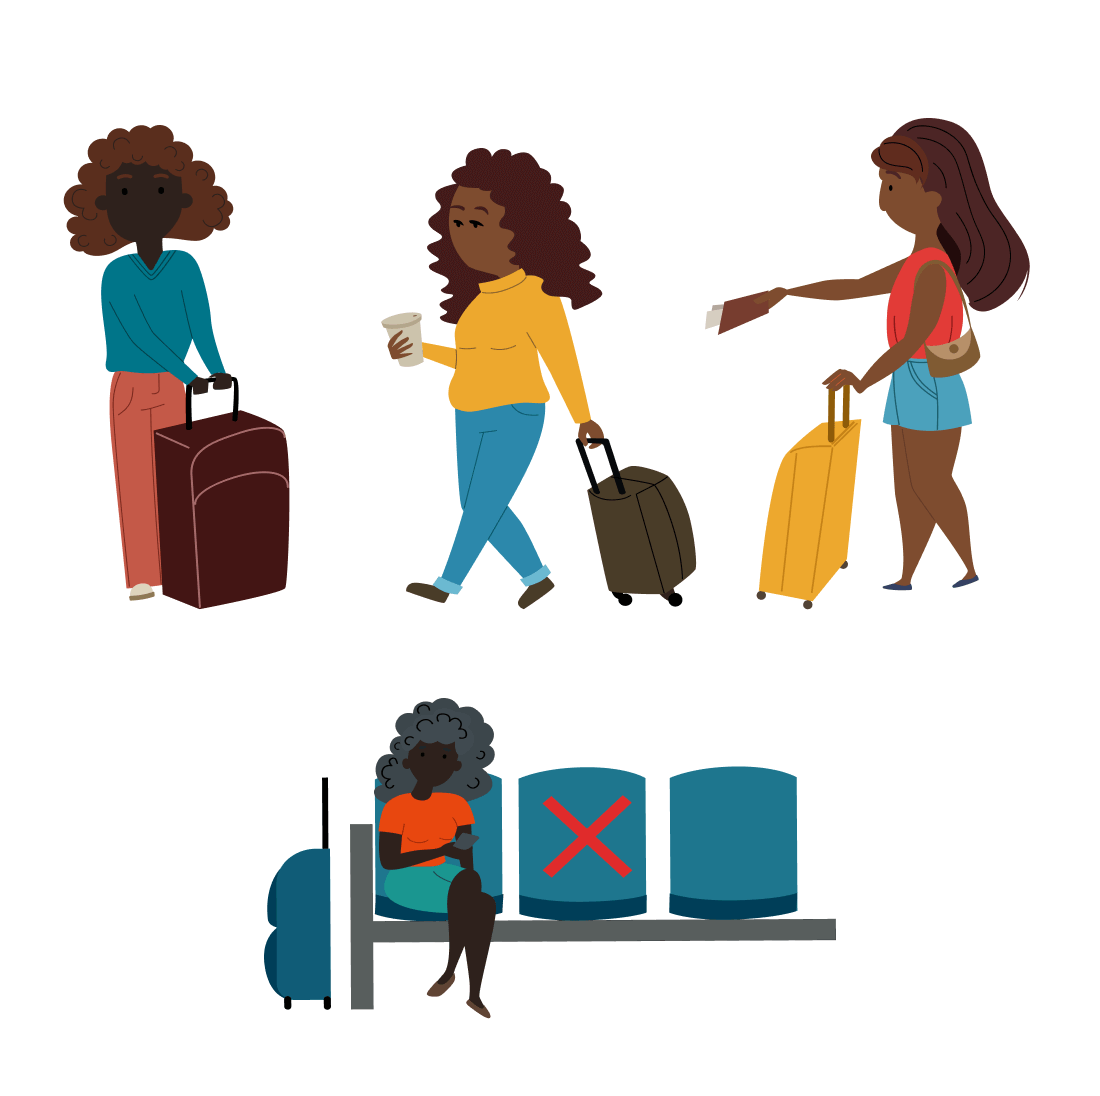 A black girl is traveling with a suitcase.